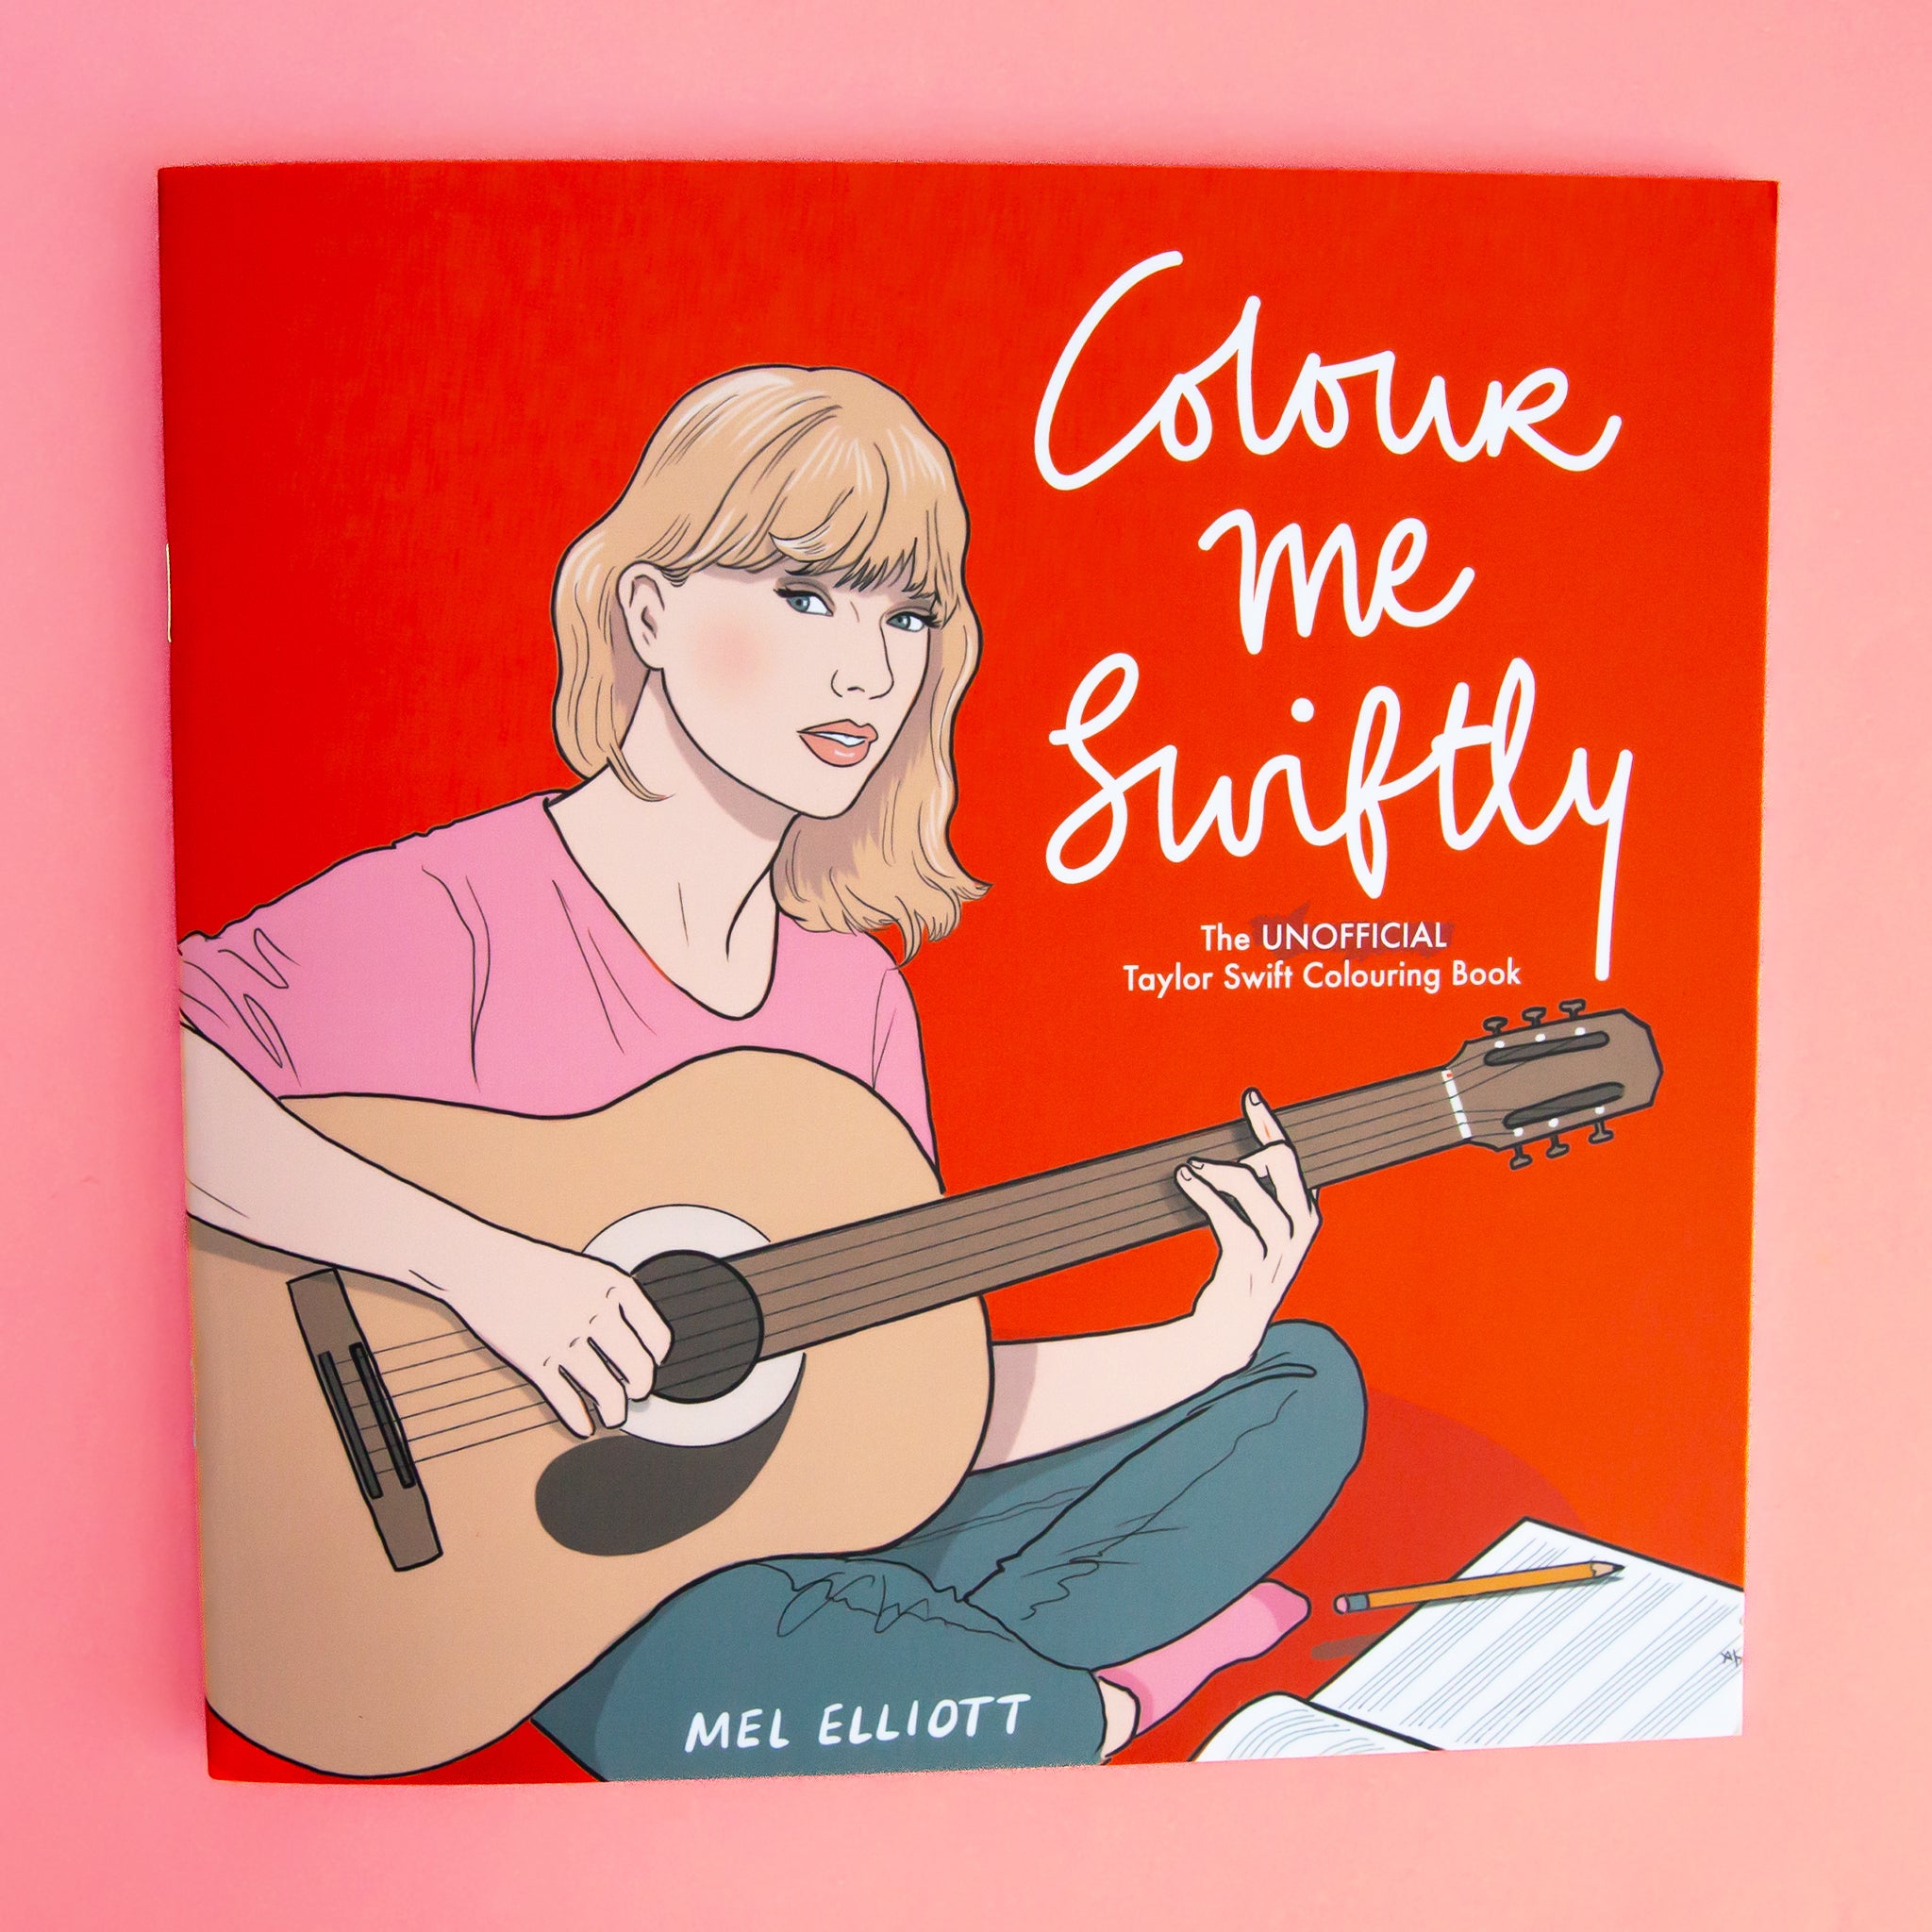 On a pink background is a red book with an illustration of Taylor Swift with a guitar and the white title on the right that reads, "Colour me Swiftly The Unofficial Taylor Swift Colouring Book".